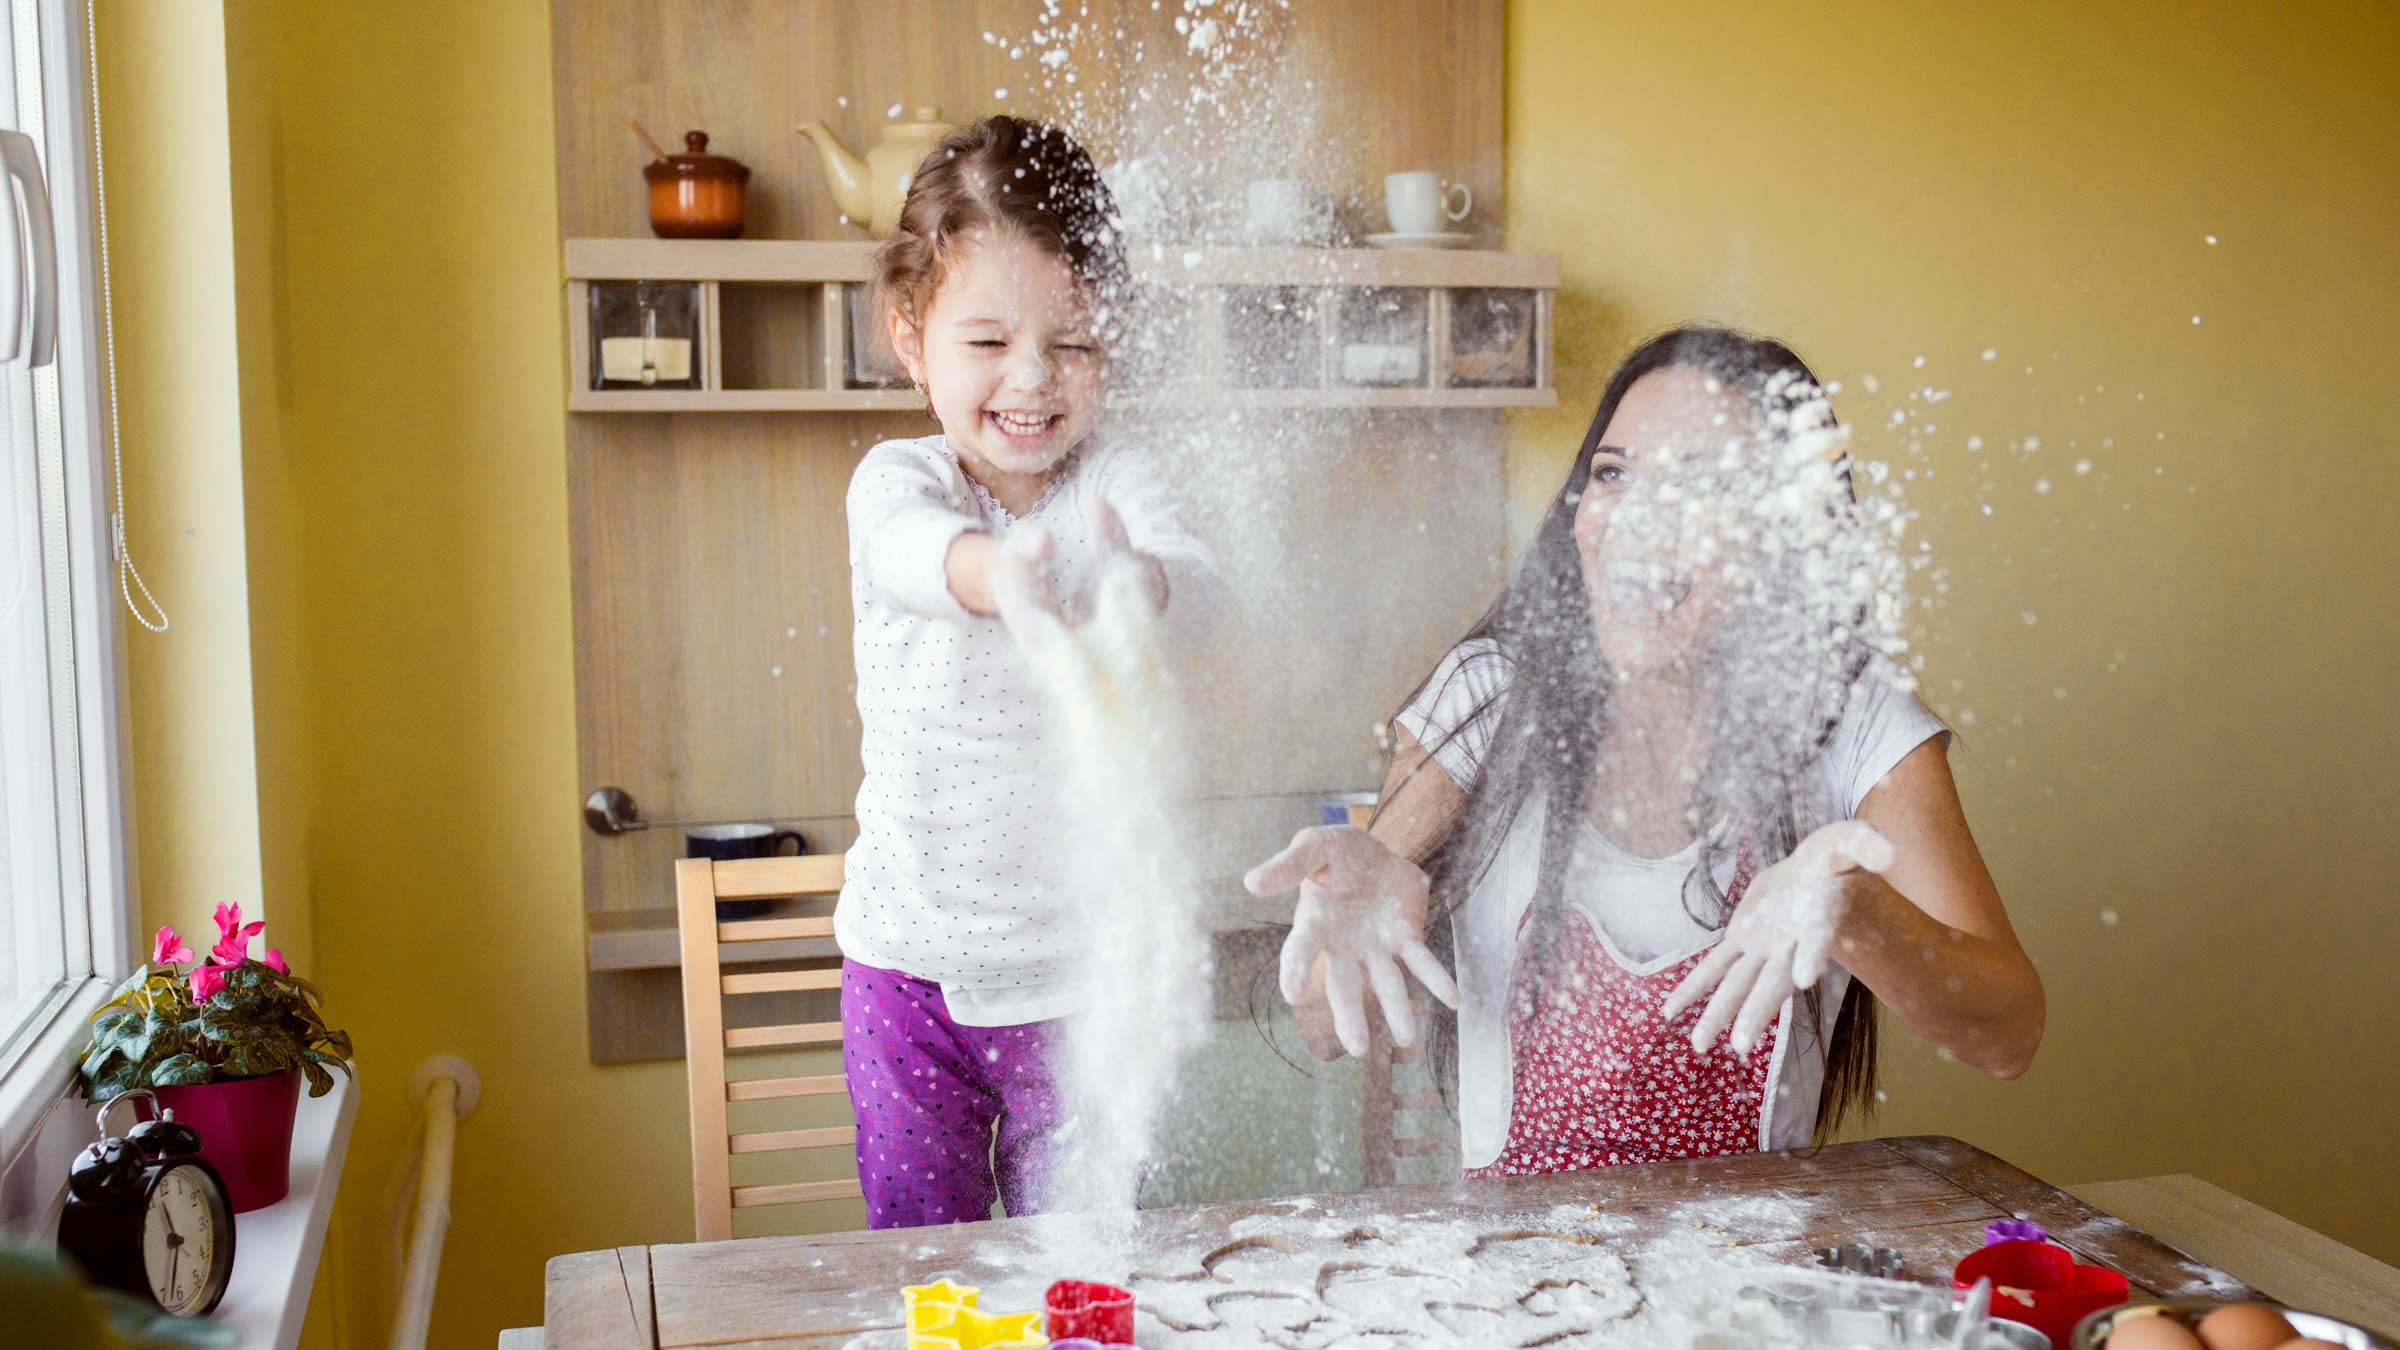 A woman and her young daughter throw flour in the air as they make cookie shapes